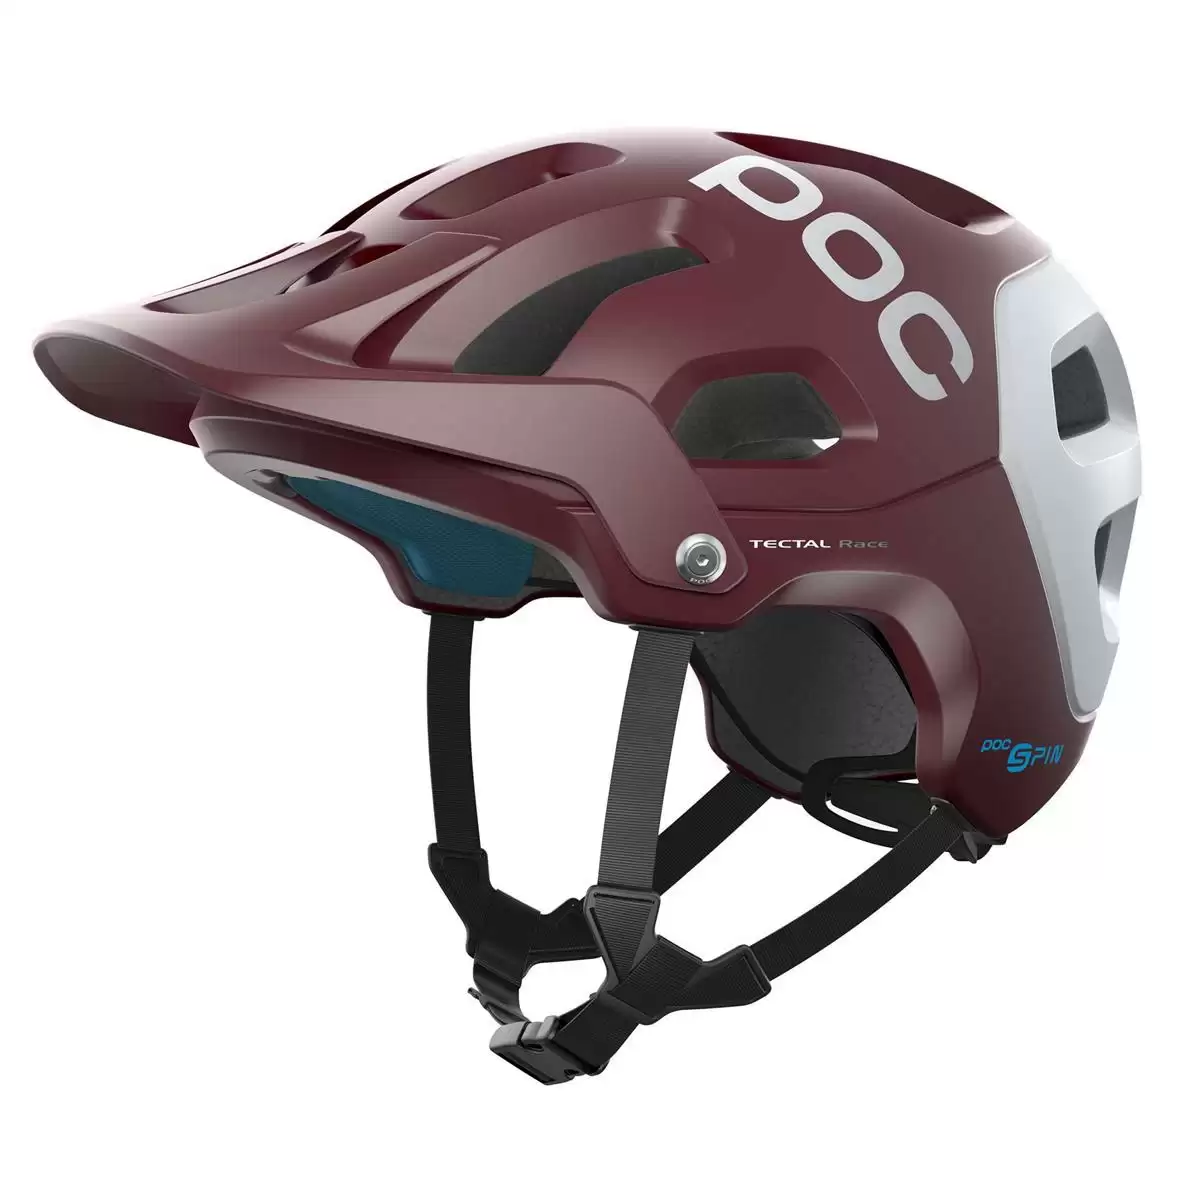 Enduro Helmet Tectal Race Spin Red Size XS-S (51-54cm) - image